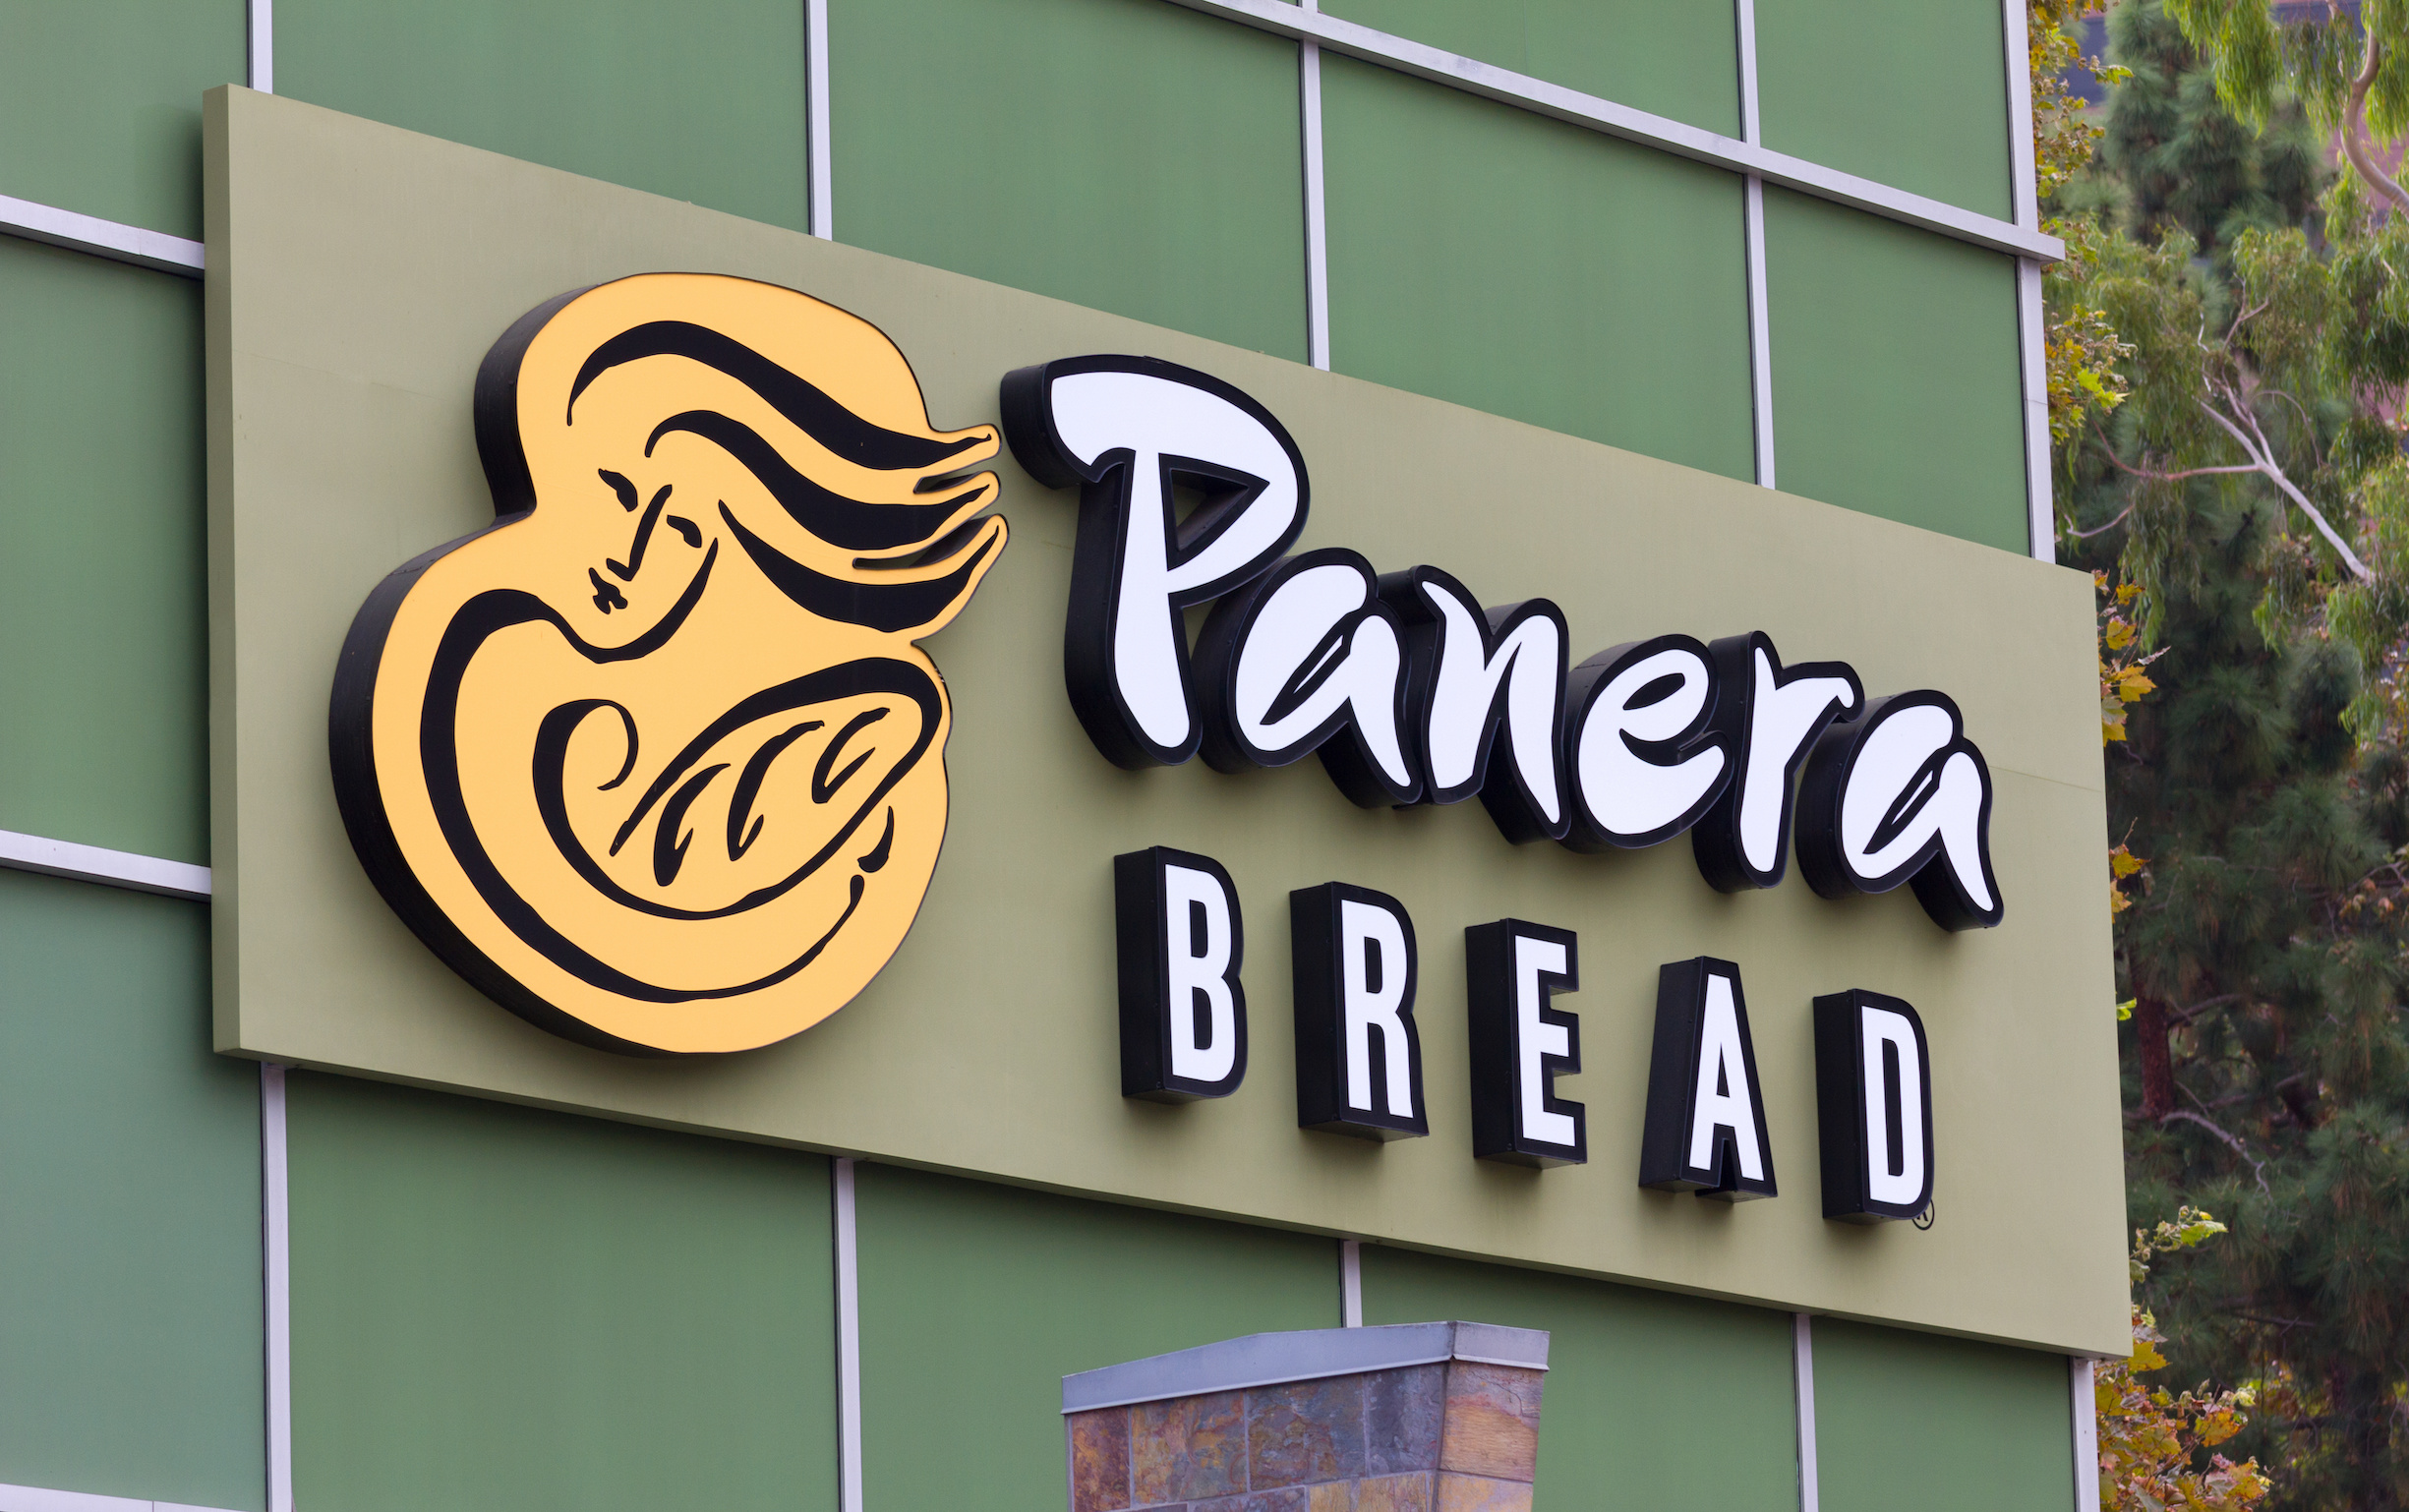 Panera bread sign on storefront.